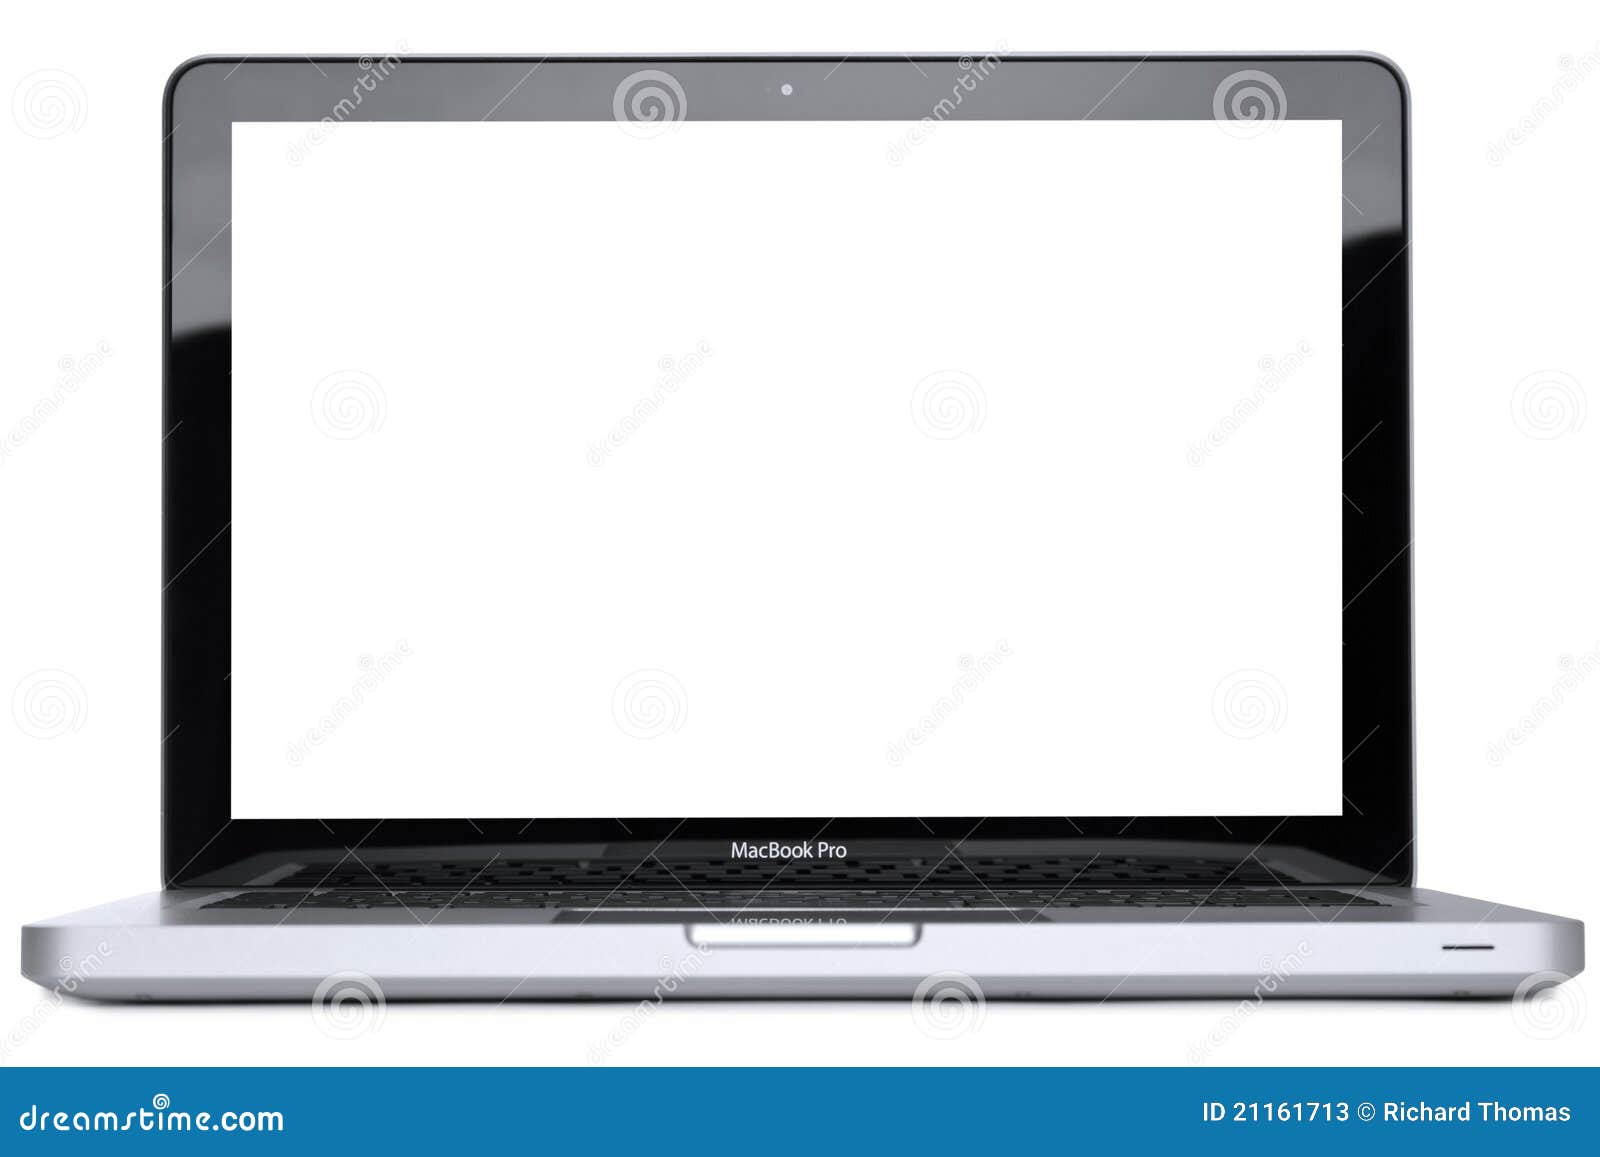 clipart for macbook pro - photo #11